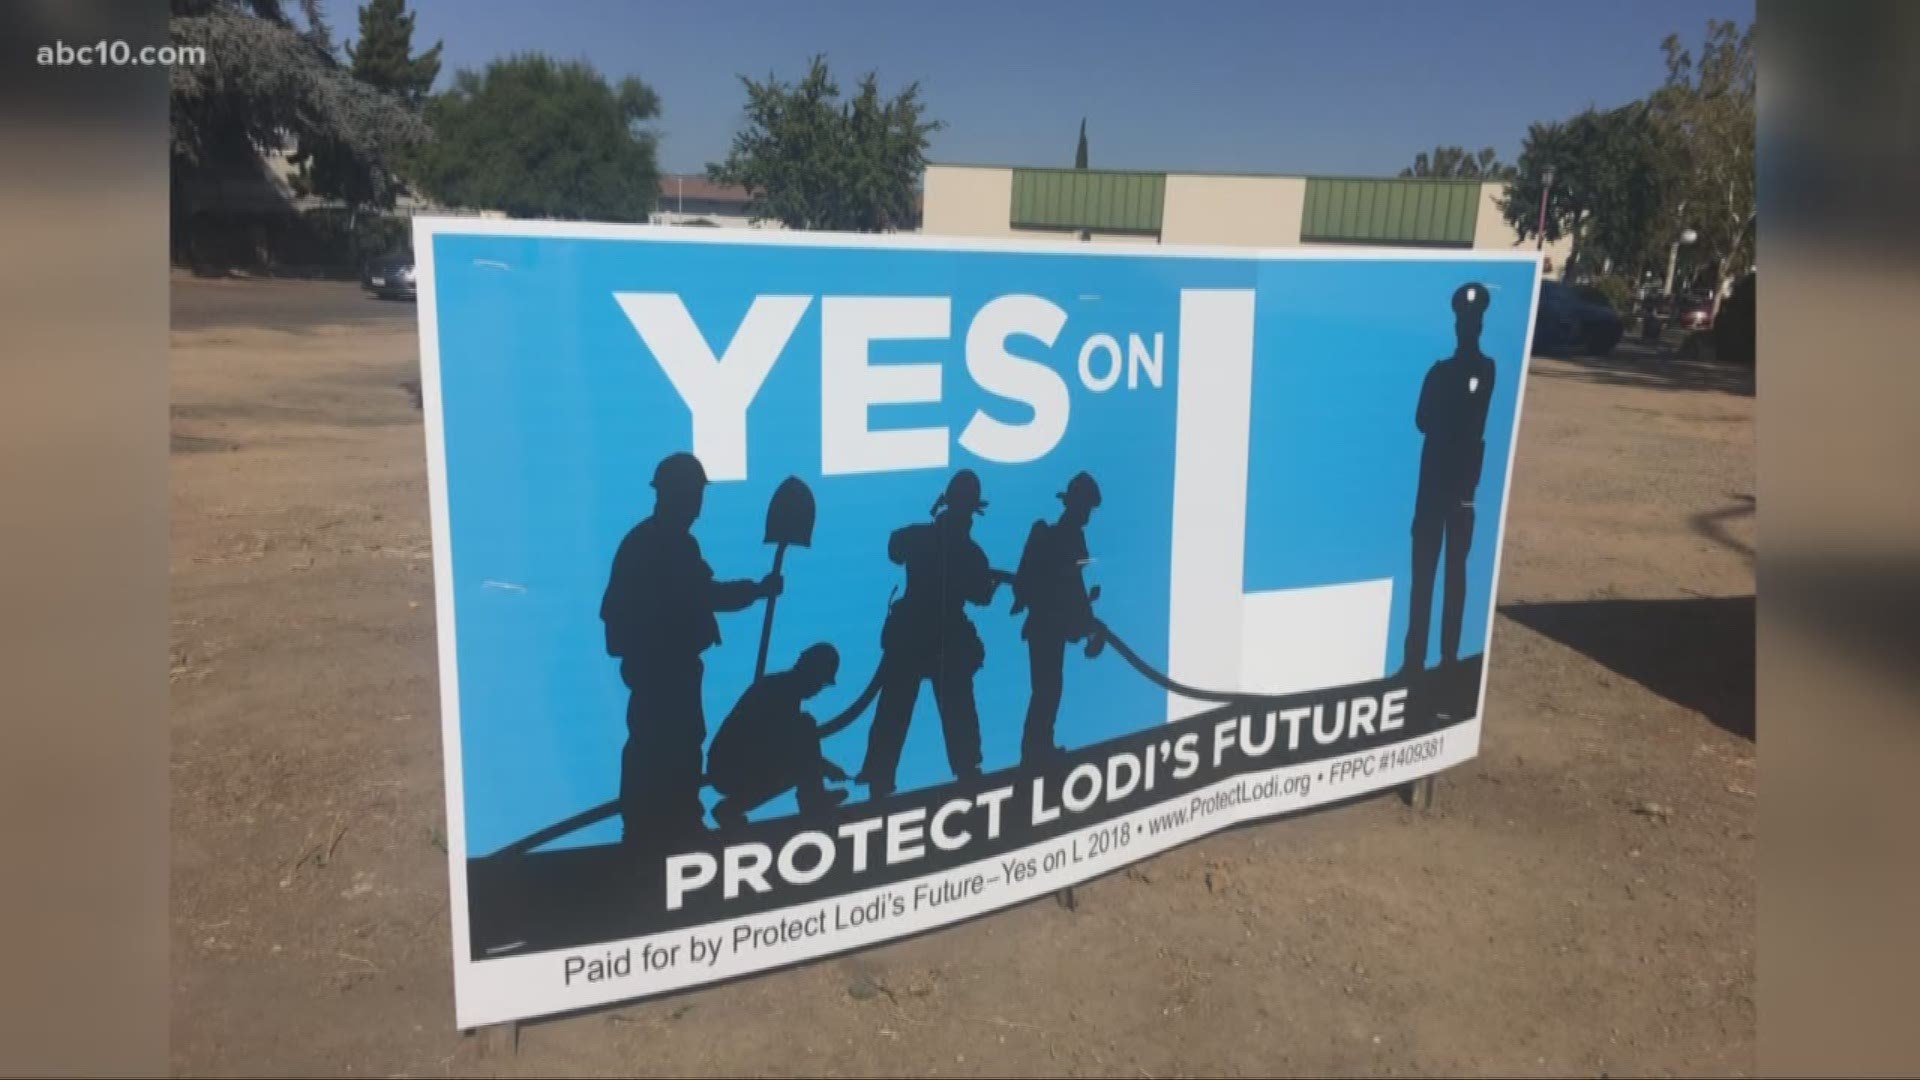 City voters are just weeks away from voting on Measure L, which would raise the sales tax in Lodi by a half cent.